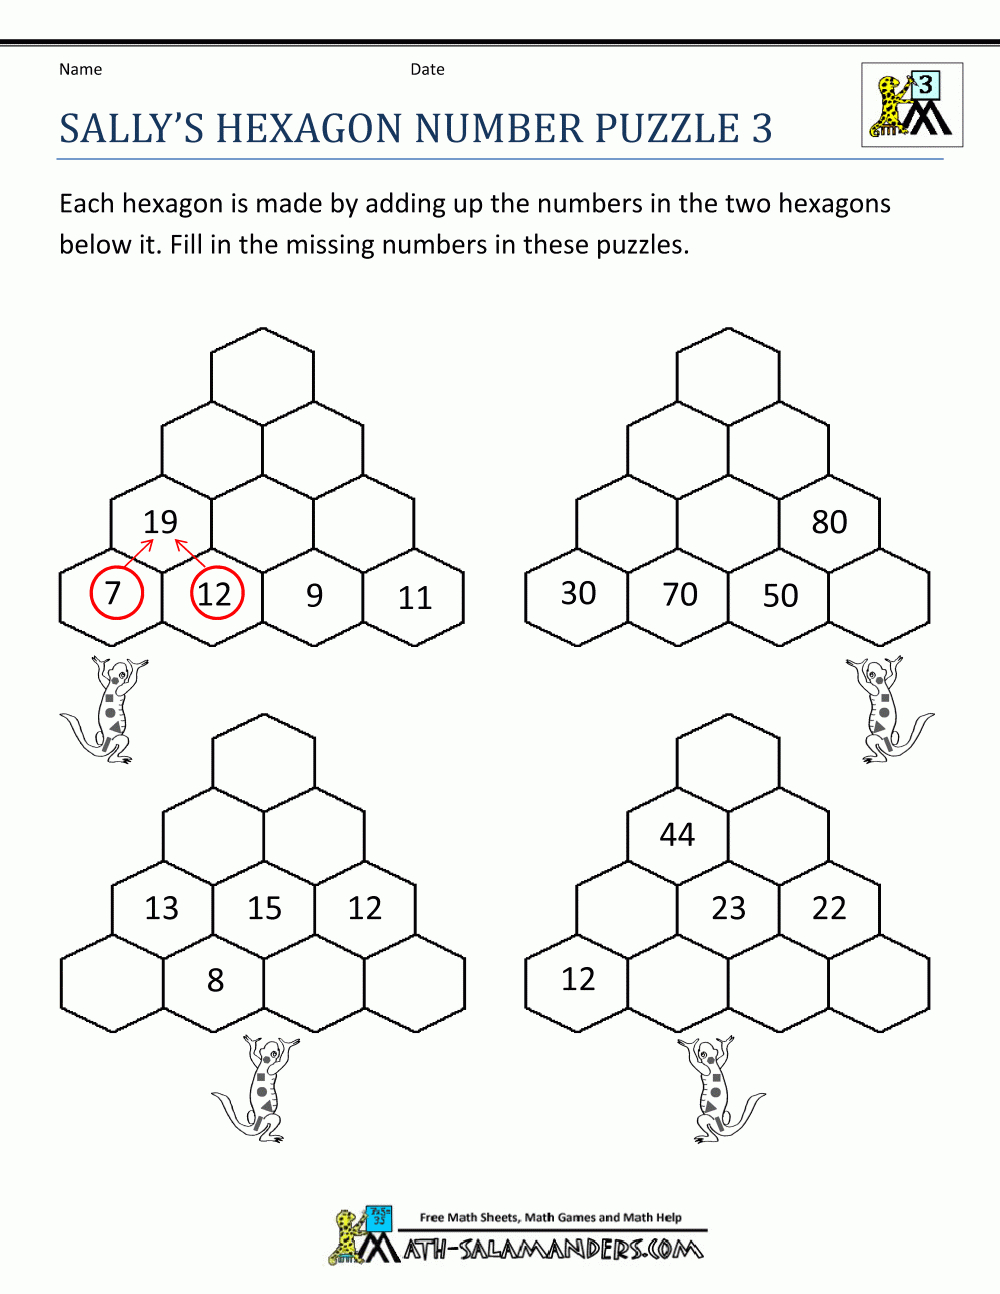 Math Puzzle Worksheets 3Rd Grade - Printable Math Puzzles For 3Rd Grade